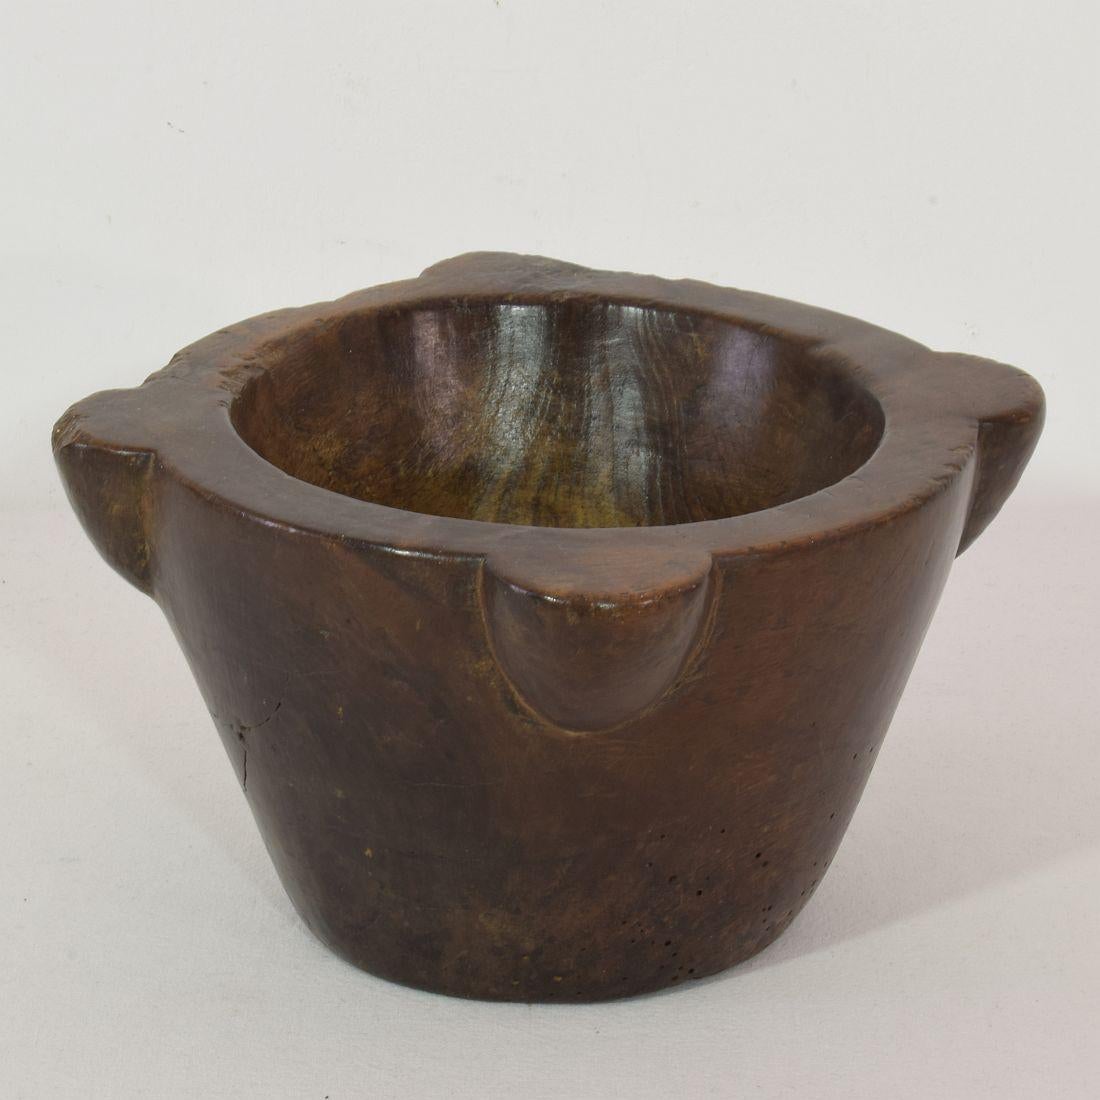 Beautiful and very rare wooden mortar, France, circa 1750-1850. Great eyecatcher.
Weathered and but in a good condition.